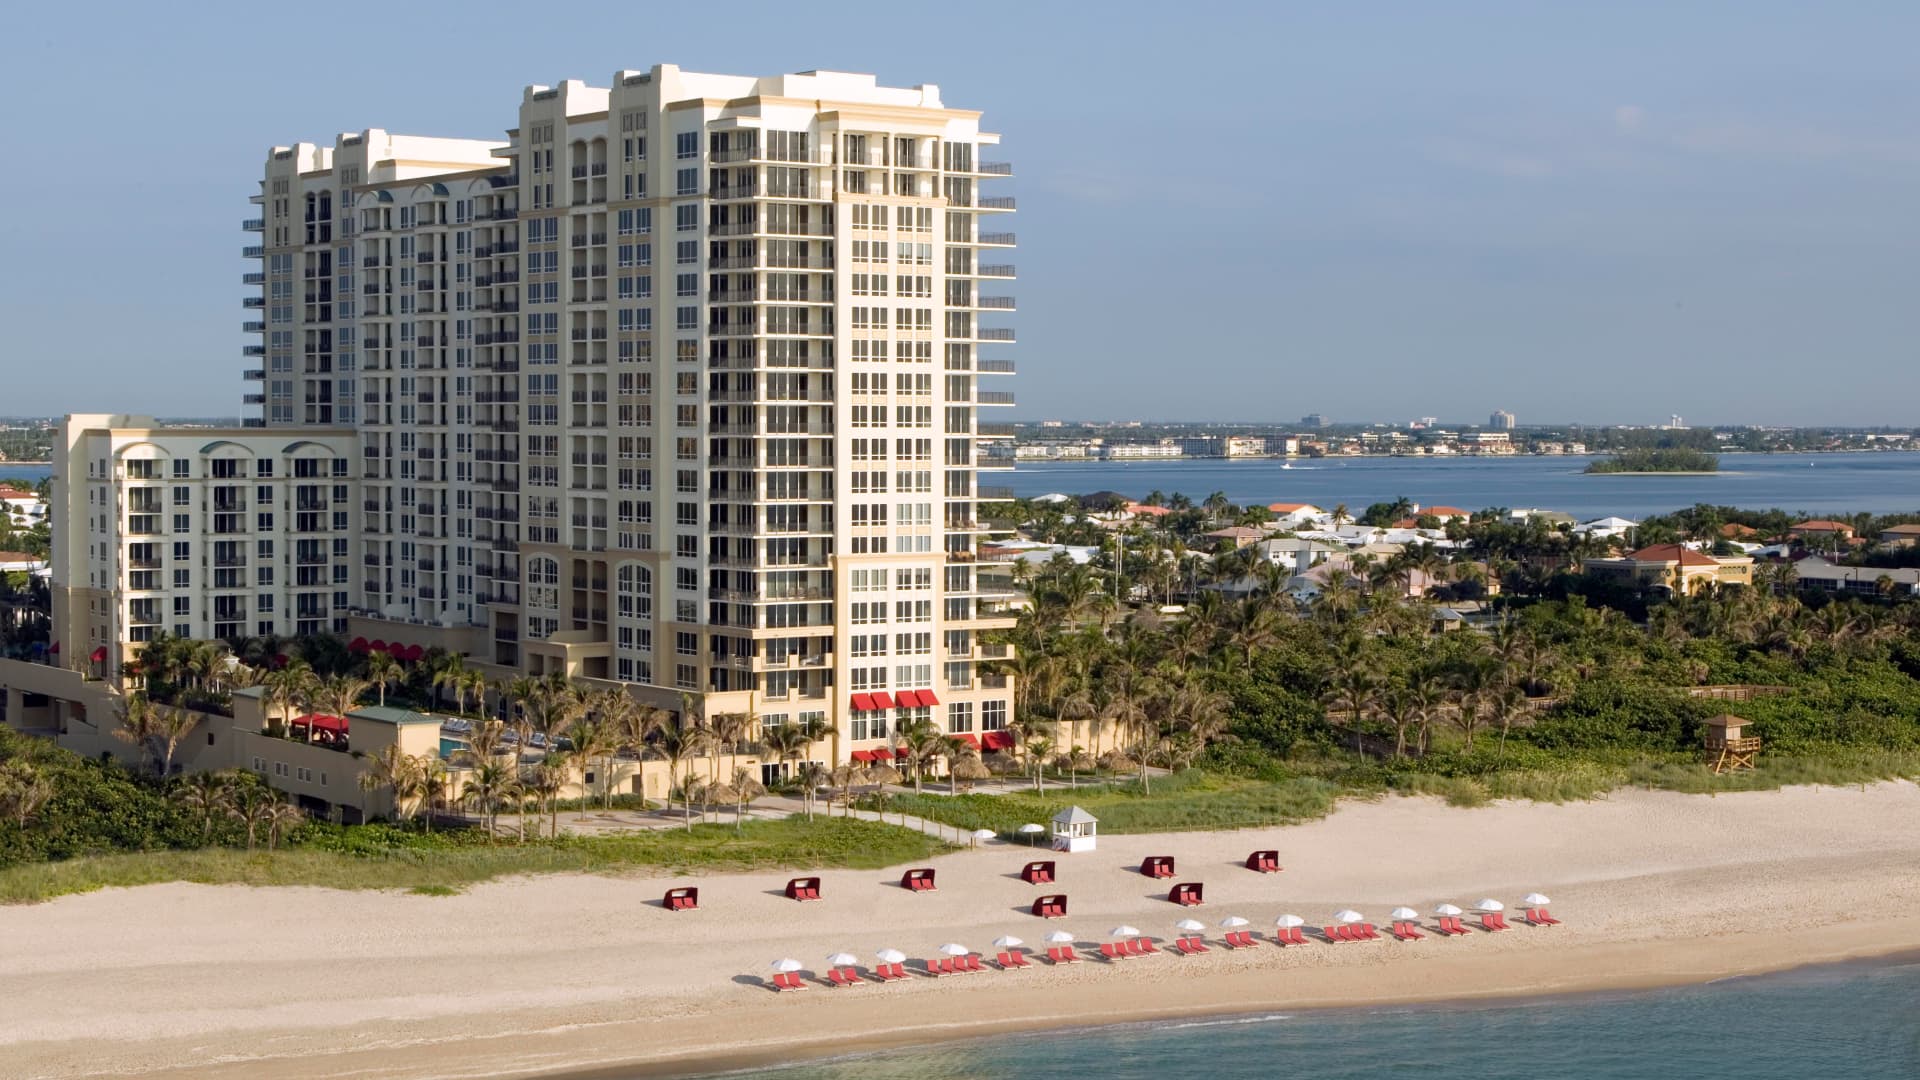 Florida's Palm Beach Marriott Singer Island Beach Resort & Spa is nearly fully booked for the Christmas holidays, according to the hotel.